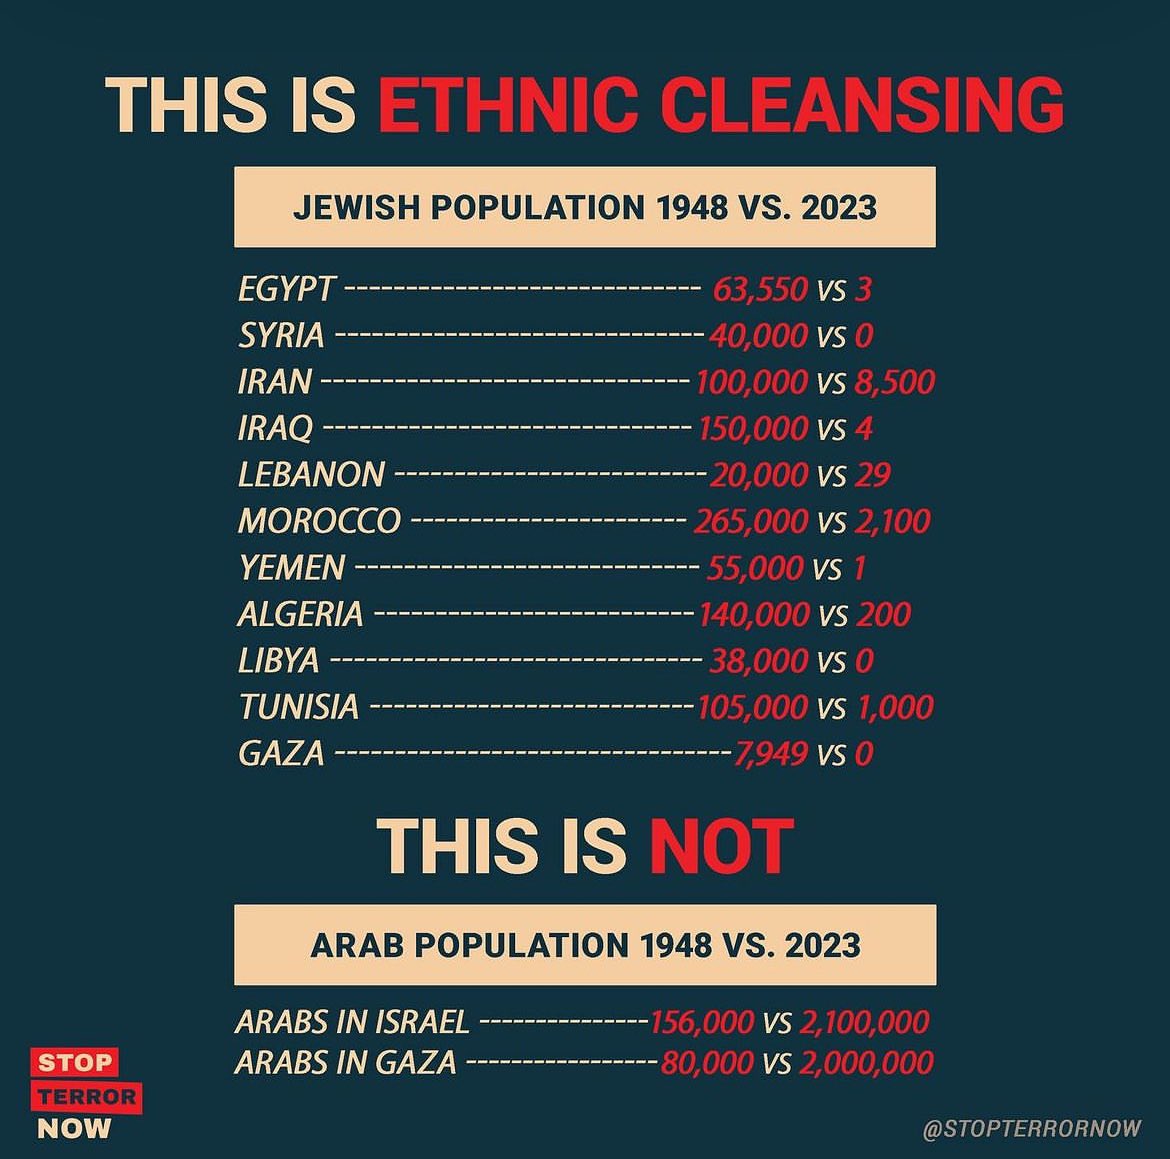 Hello students! Today we’re going to learn what ethnic cleansing looks like:

#StandWithIsrael 
#Ethnic_Cleansing 
#EthnicCleansing